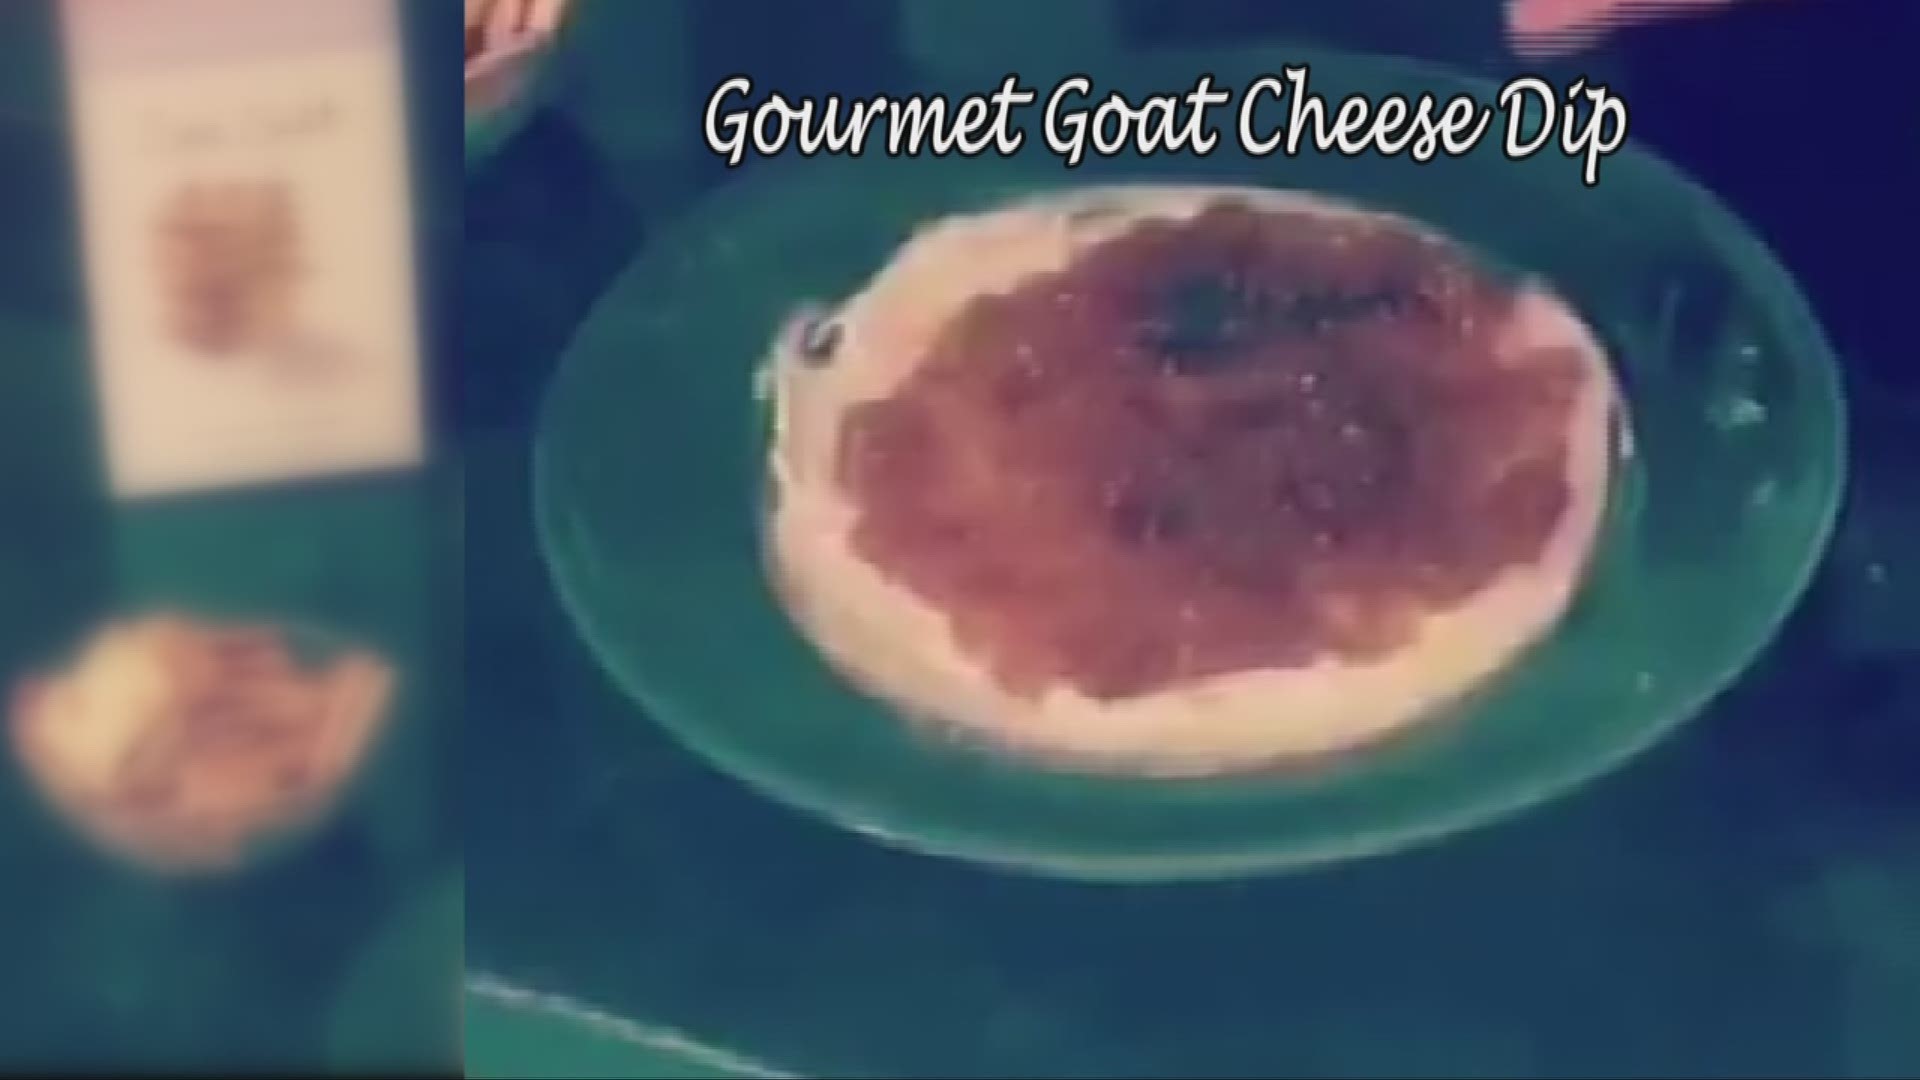 July 14, 2017: Looking for a simple dish? WKYC's Hollie Strano shares her friend's recipe for gourmet goat cheese dip that only uses two ingredients. Enjoy!